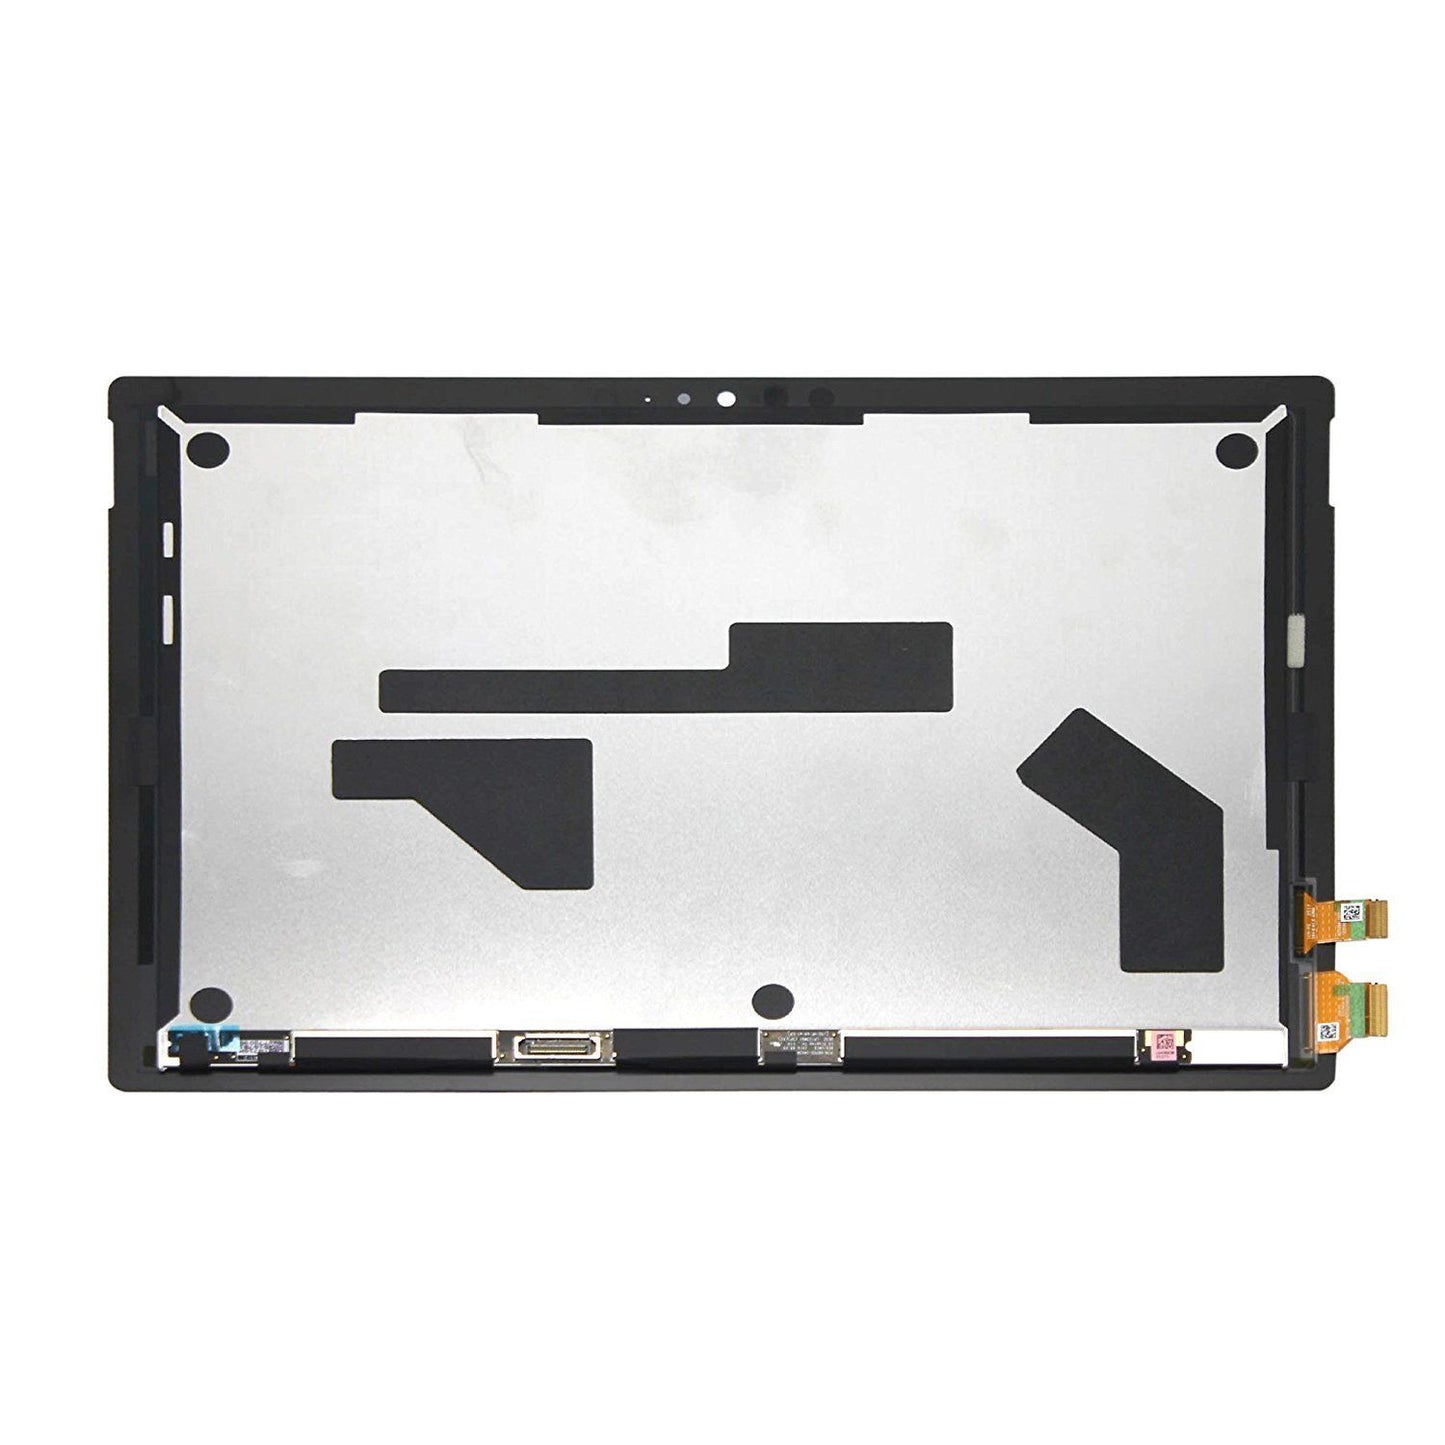 Refurbished LCD Touch Screen Assembly Compatible For Microsoft Surface Pro 4 A1724 | Pro 5 1796 | Pro 6 1807 Version 2 | LG VERSION: LP123WQ1